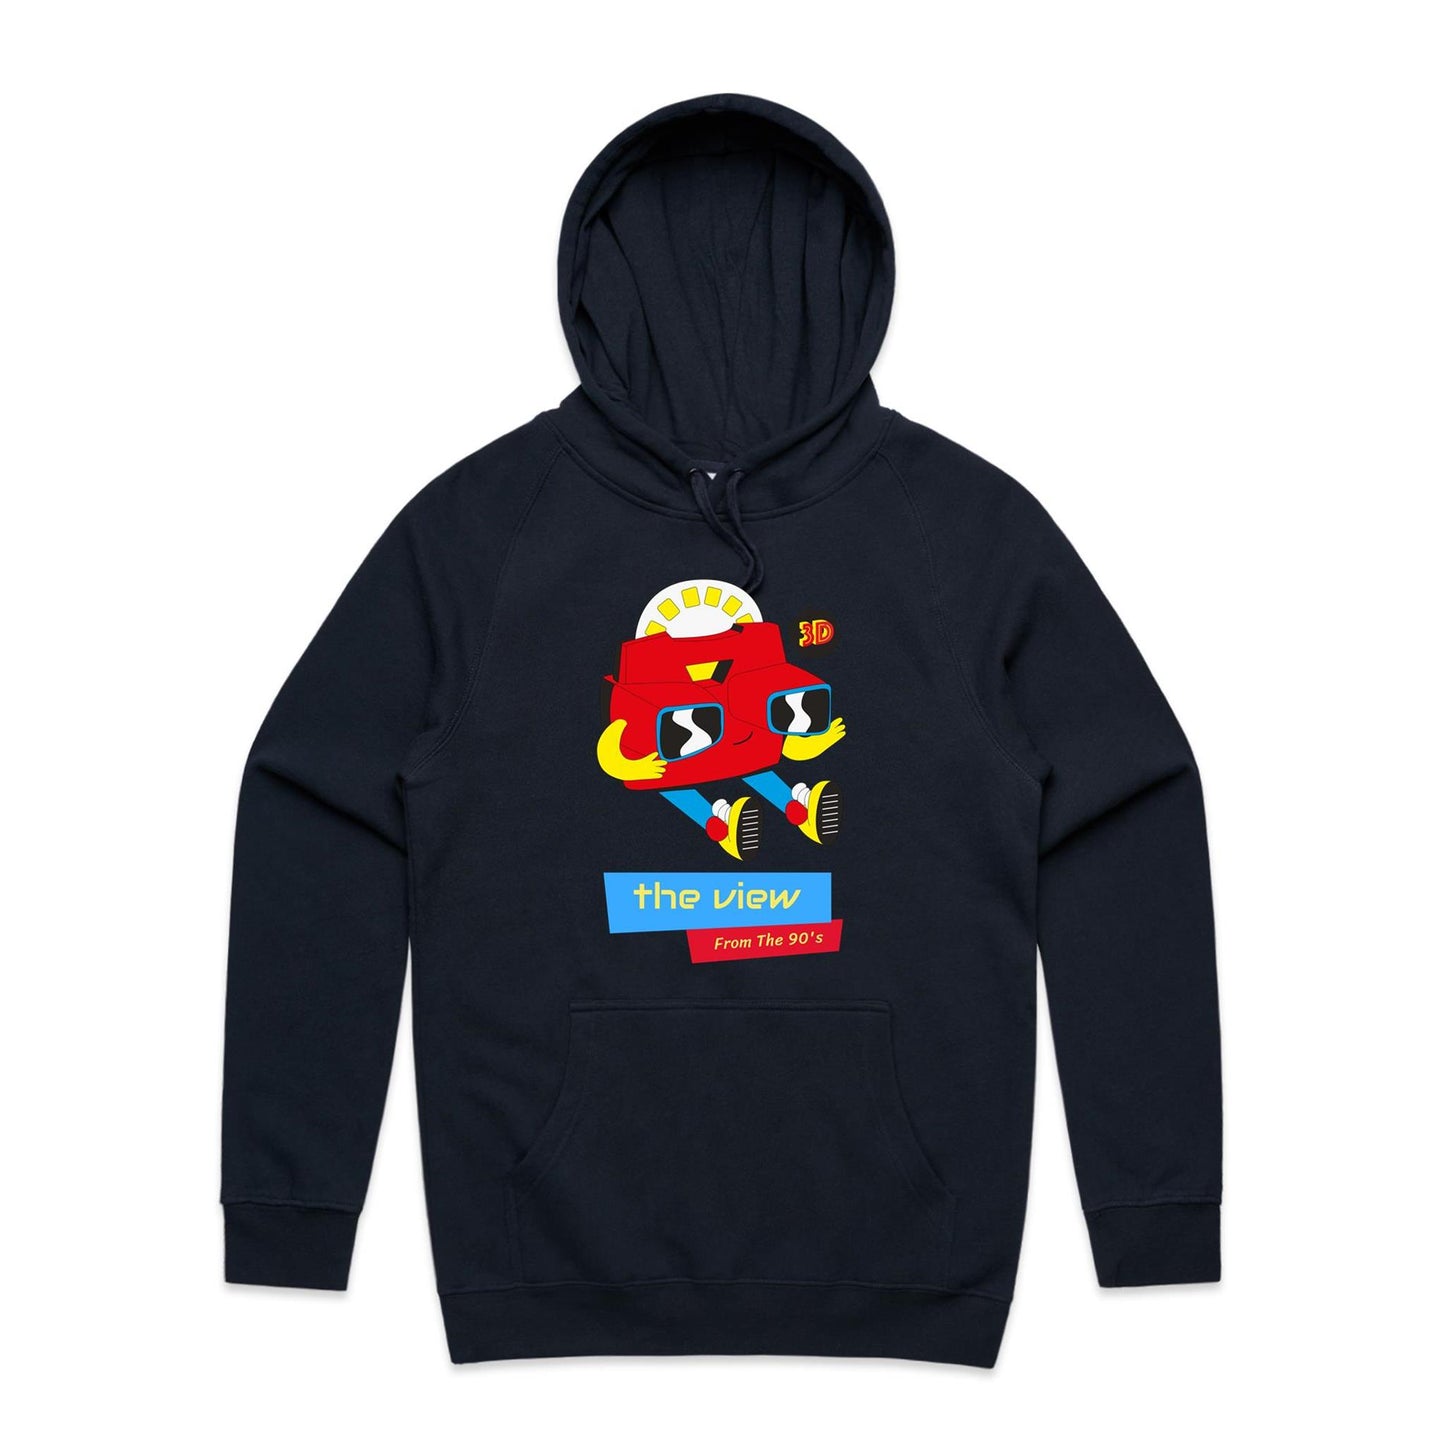 The View From The 90's - Supply Hood Navy Mens Supply Hoodie Retro